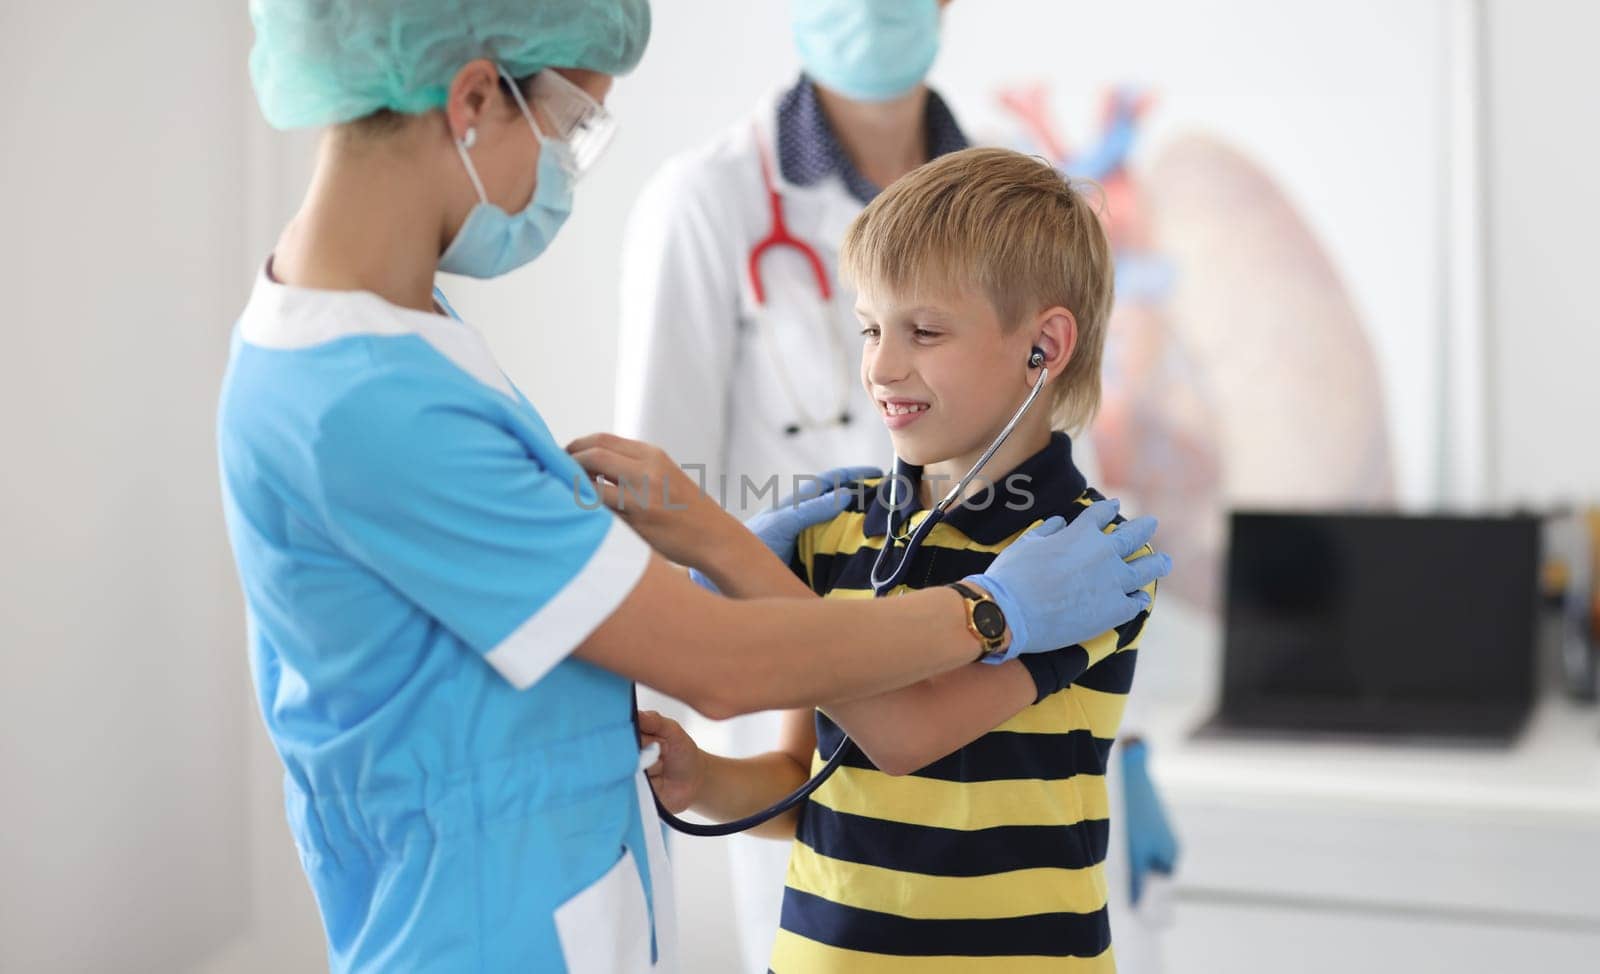 Child at doctor's appointment tries on stethoscope by kuprevich